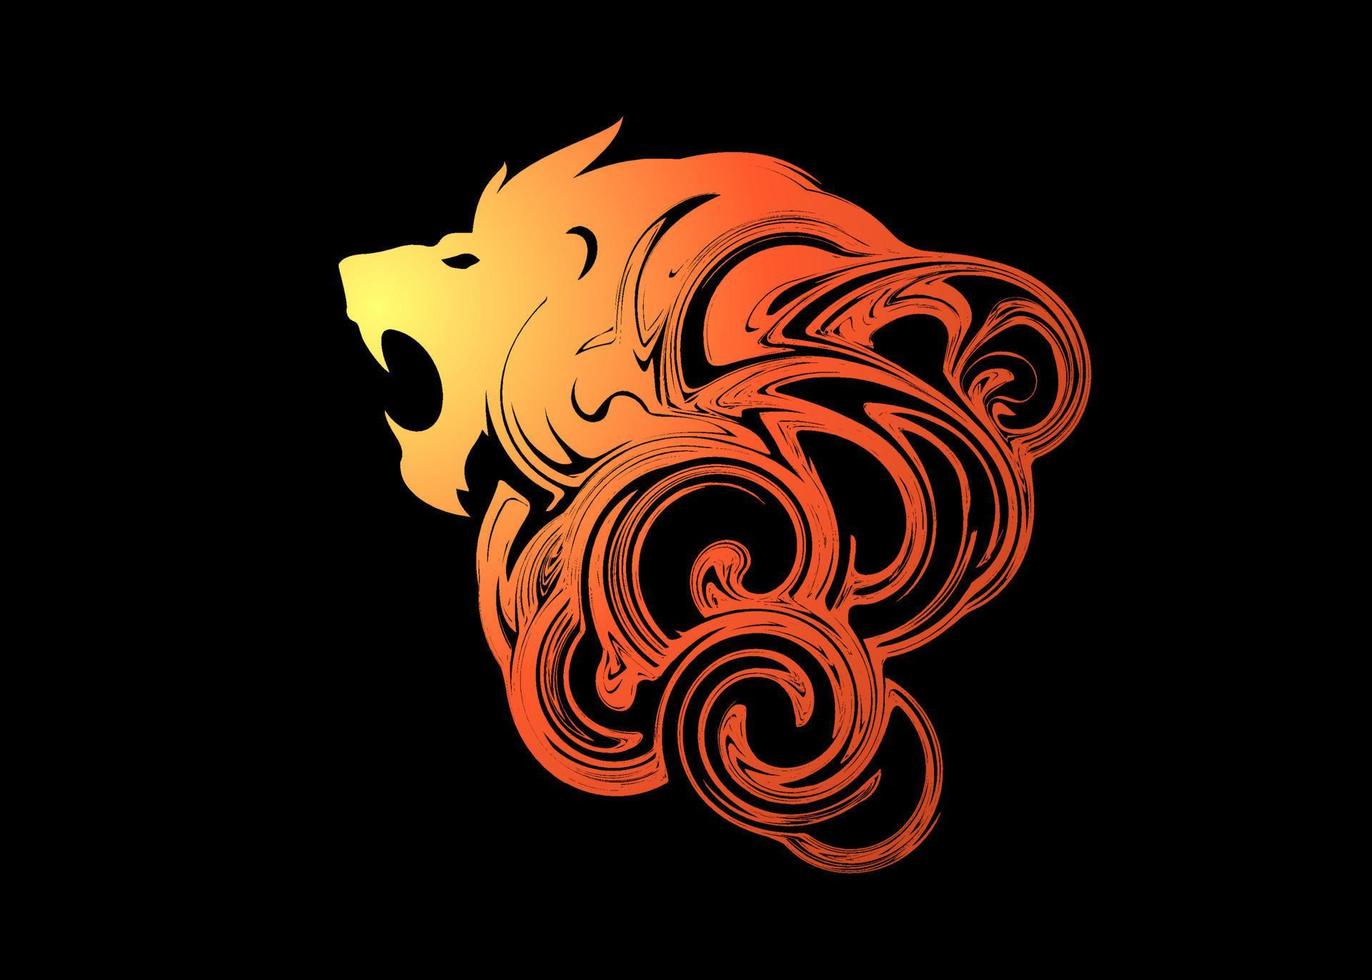 Beautiful Abstract Animal Lion Roar silhouette painting wallpaper or background vector